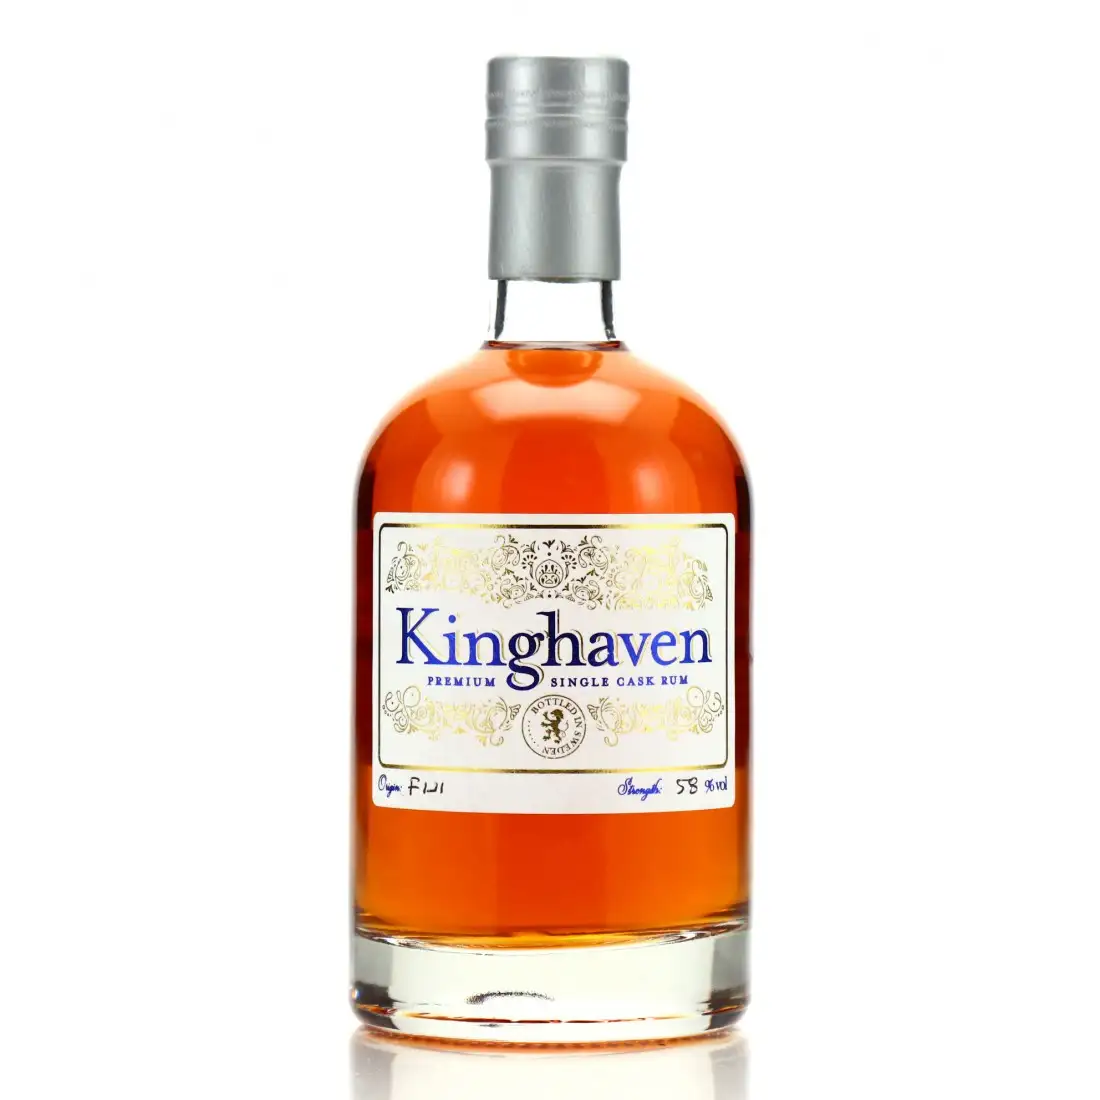 Image of the front of the bottle of the rum Premium Single Cask Rum